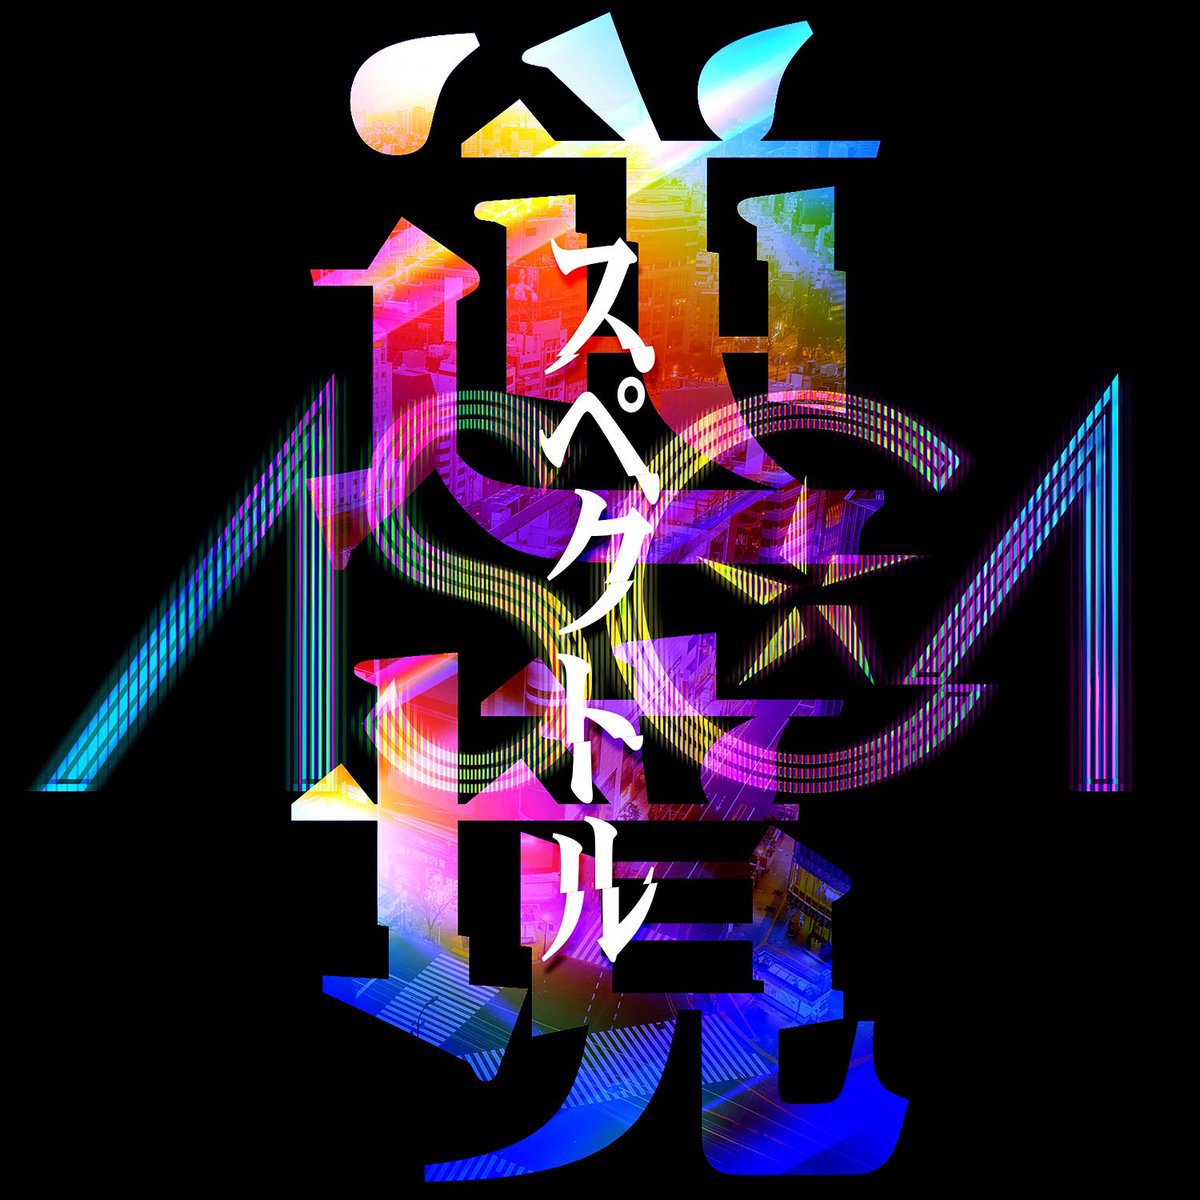 Cover art for『ASCA - Gyakkyou Spectrum』from the release『Gyakkyou Spectrum』